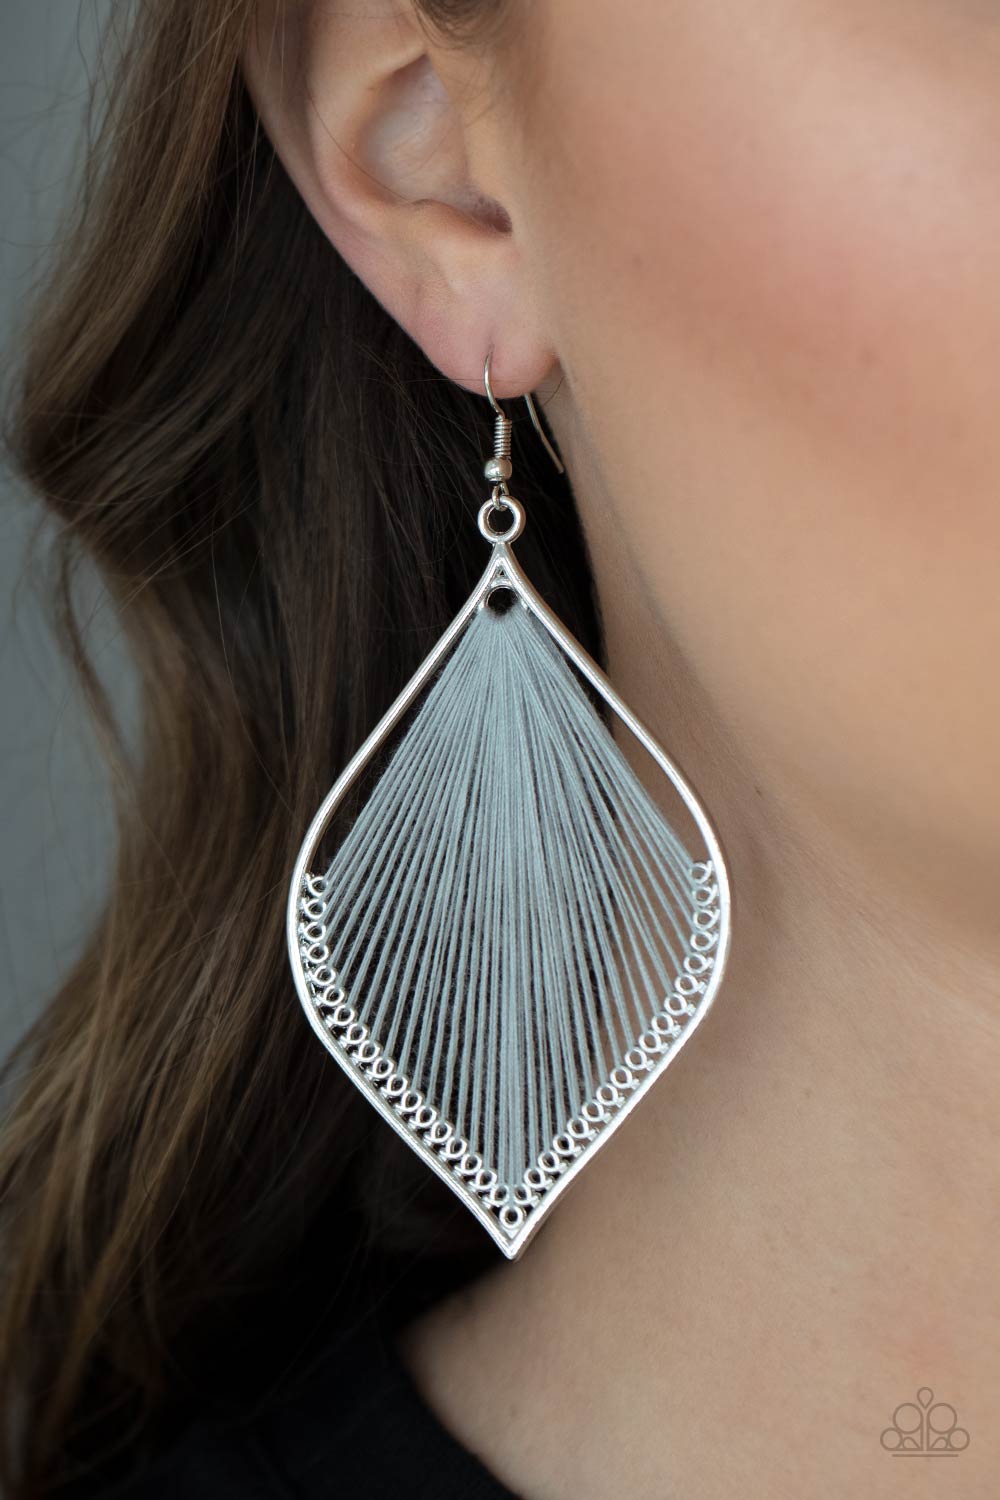 String Theory Silver Earring - Paparazzi Accessories  Ultimate Gray string is threaded through small hoops inside a silver mandala-shaped frame for a vibrant artistic adornment. Earring attaches to a standard fishhook fitting.  All Paparazzi Accessories are lead free and nickel free!  Sold as one pair of earrings.